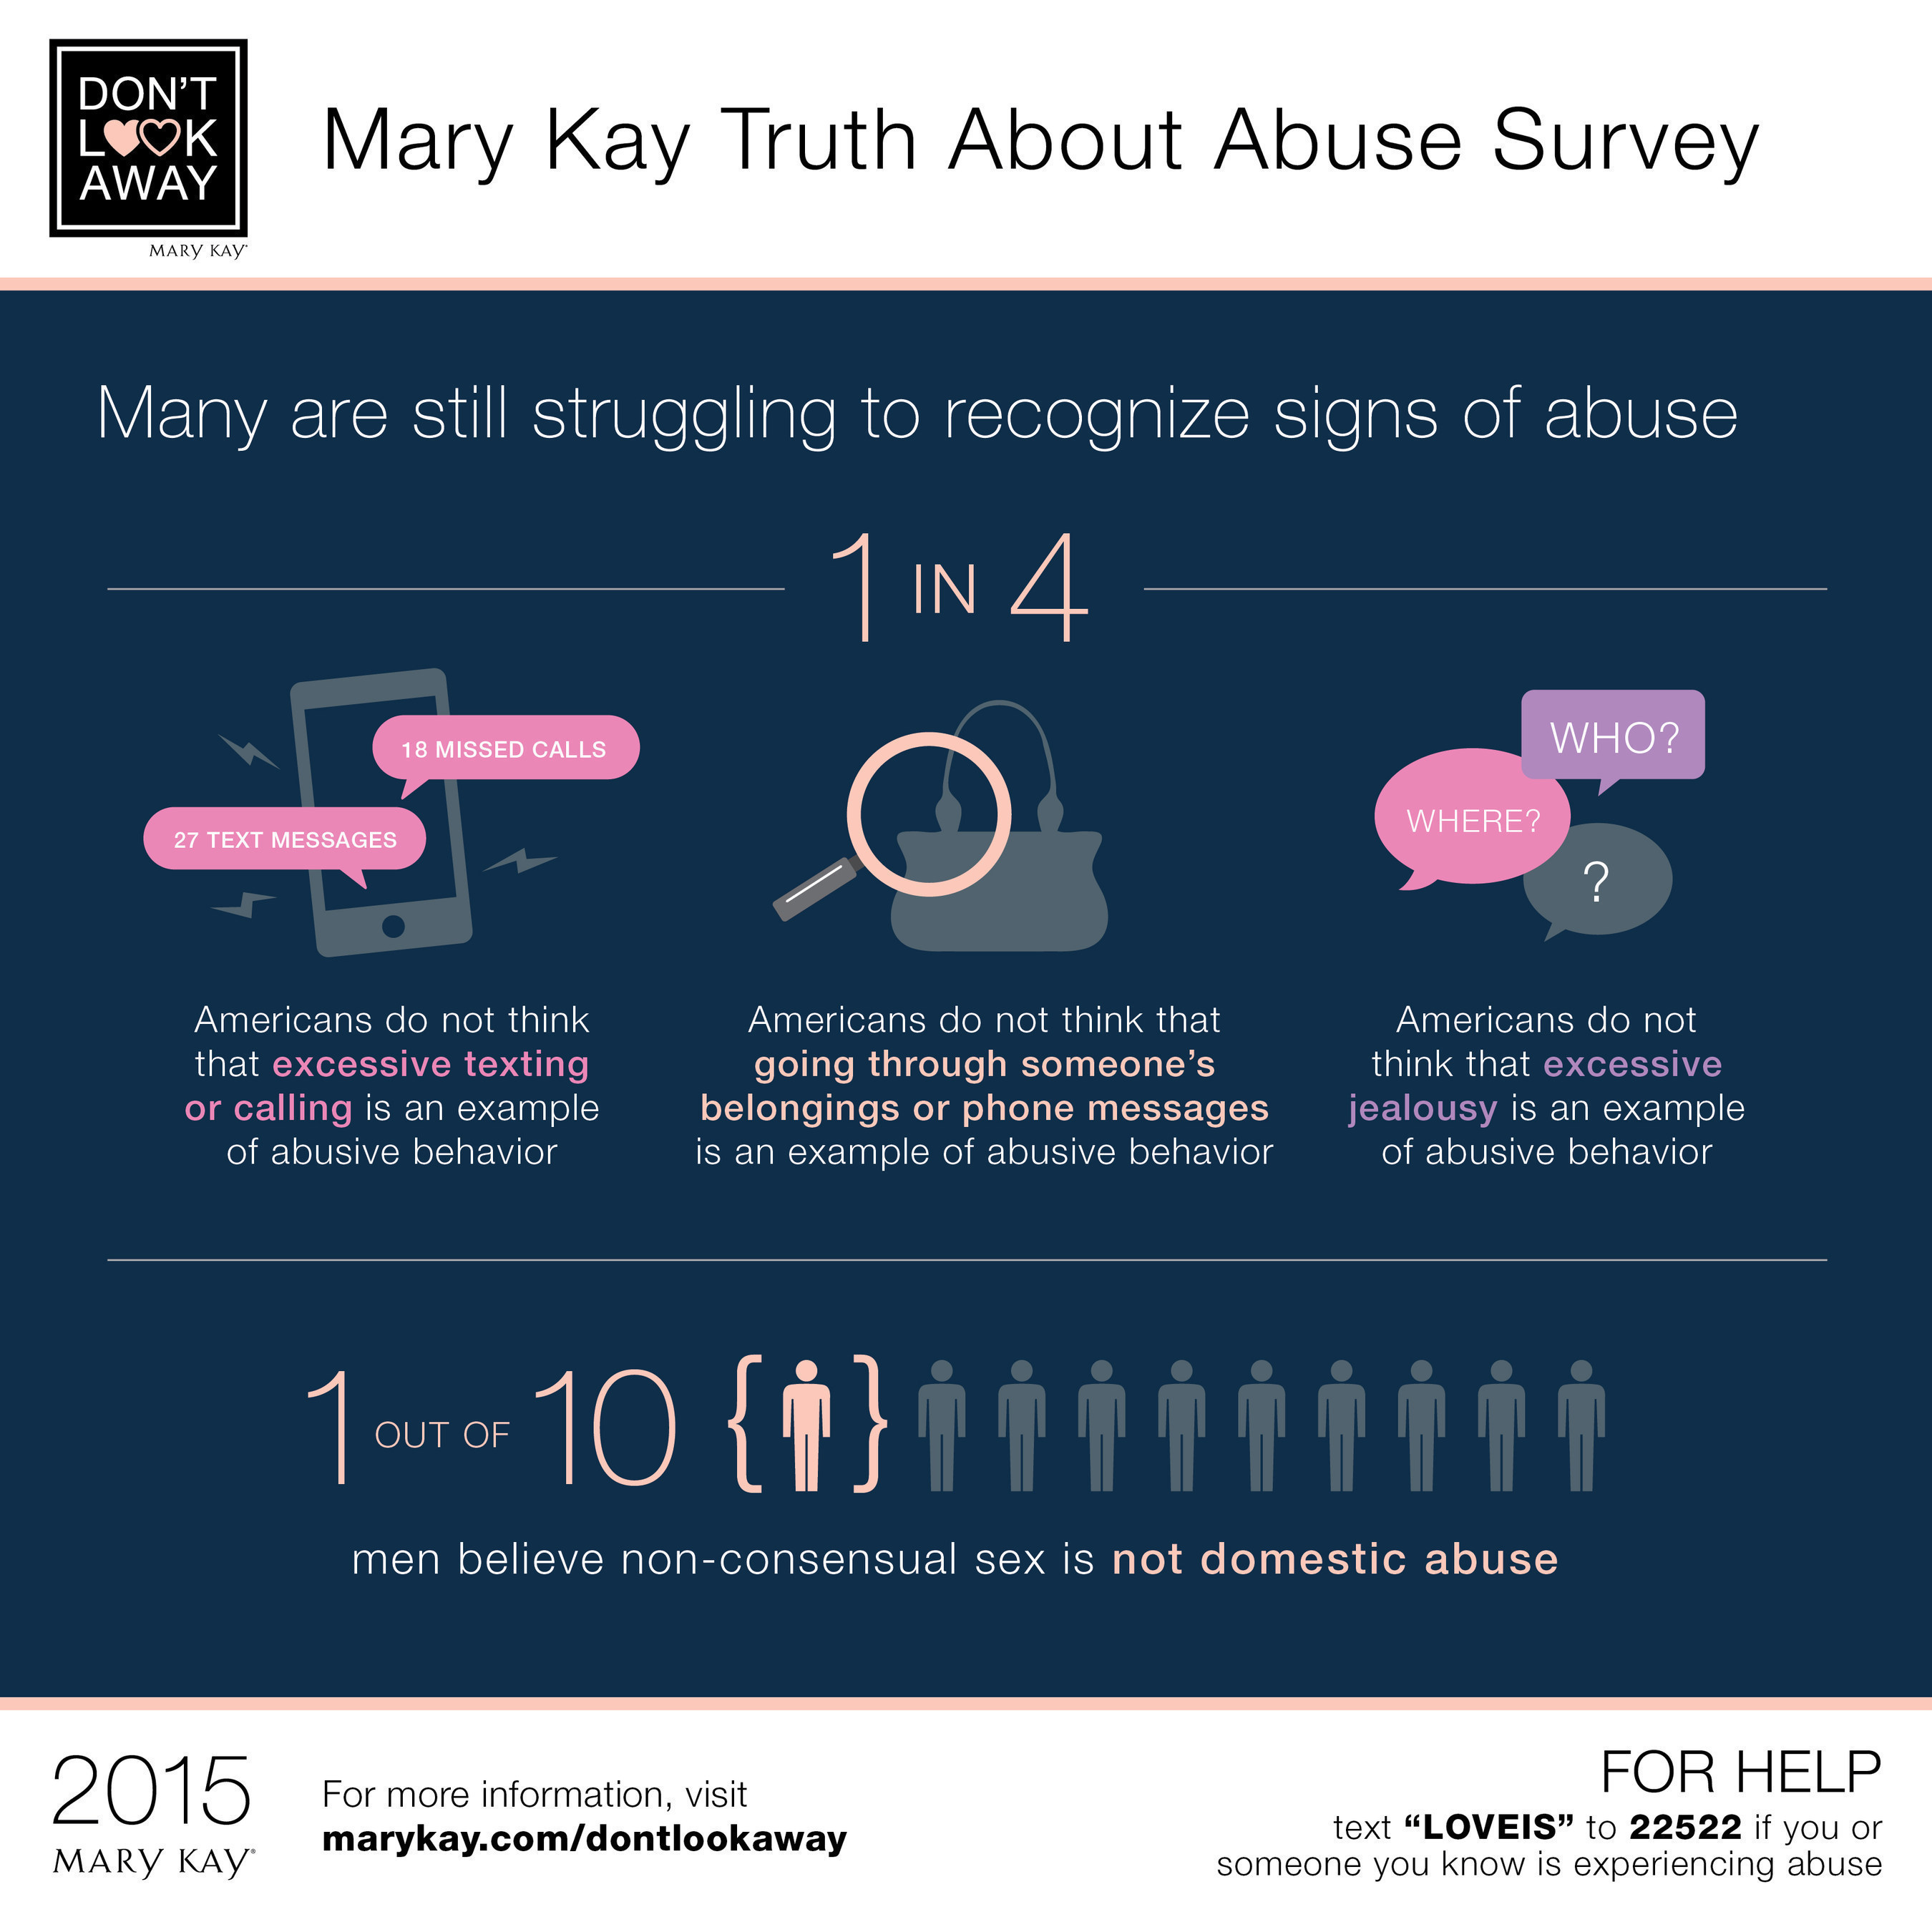 There is a critical need to recognize all forms of abuse. Mary Kay's Truth About Abuse survey reveals that Americans' awareness of domestic violence is on the rise, but that many still do not recognize signs of abuse. One thousand men and women nationwide participated in the online survey Sept. 3-11, 2015, sharing their insights and stories on the issue of domestic violence. (PRNewsFoto/Mary Kay Inc.)